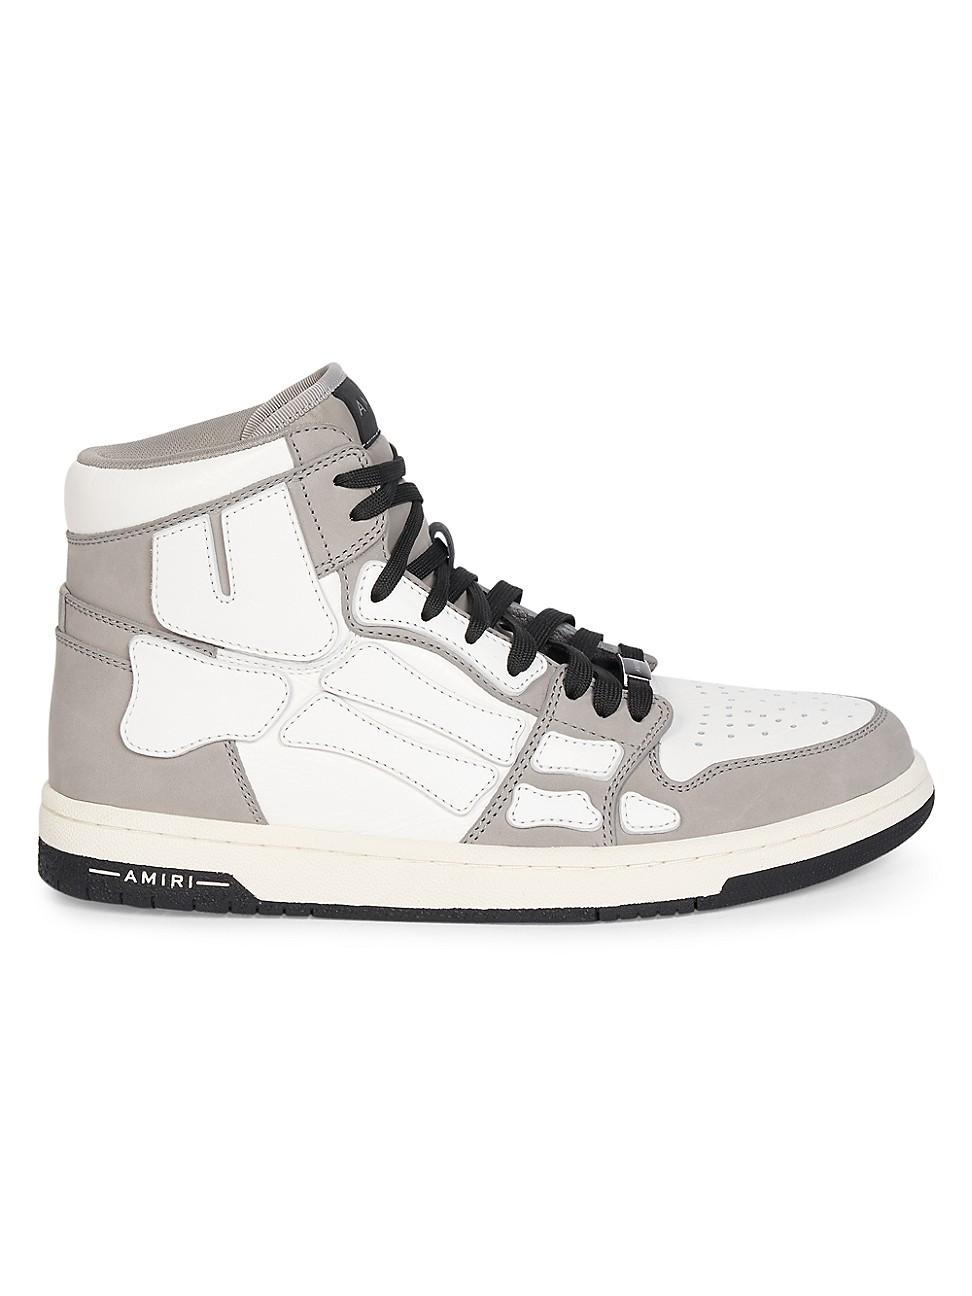 Amiri Skeleton High-top Leather Sneakers in Grey White (White) for 